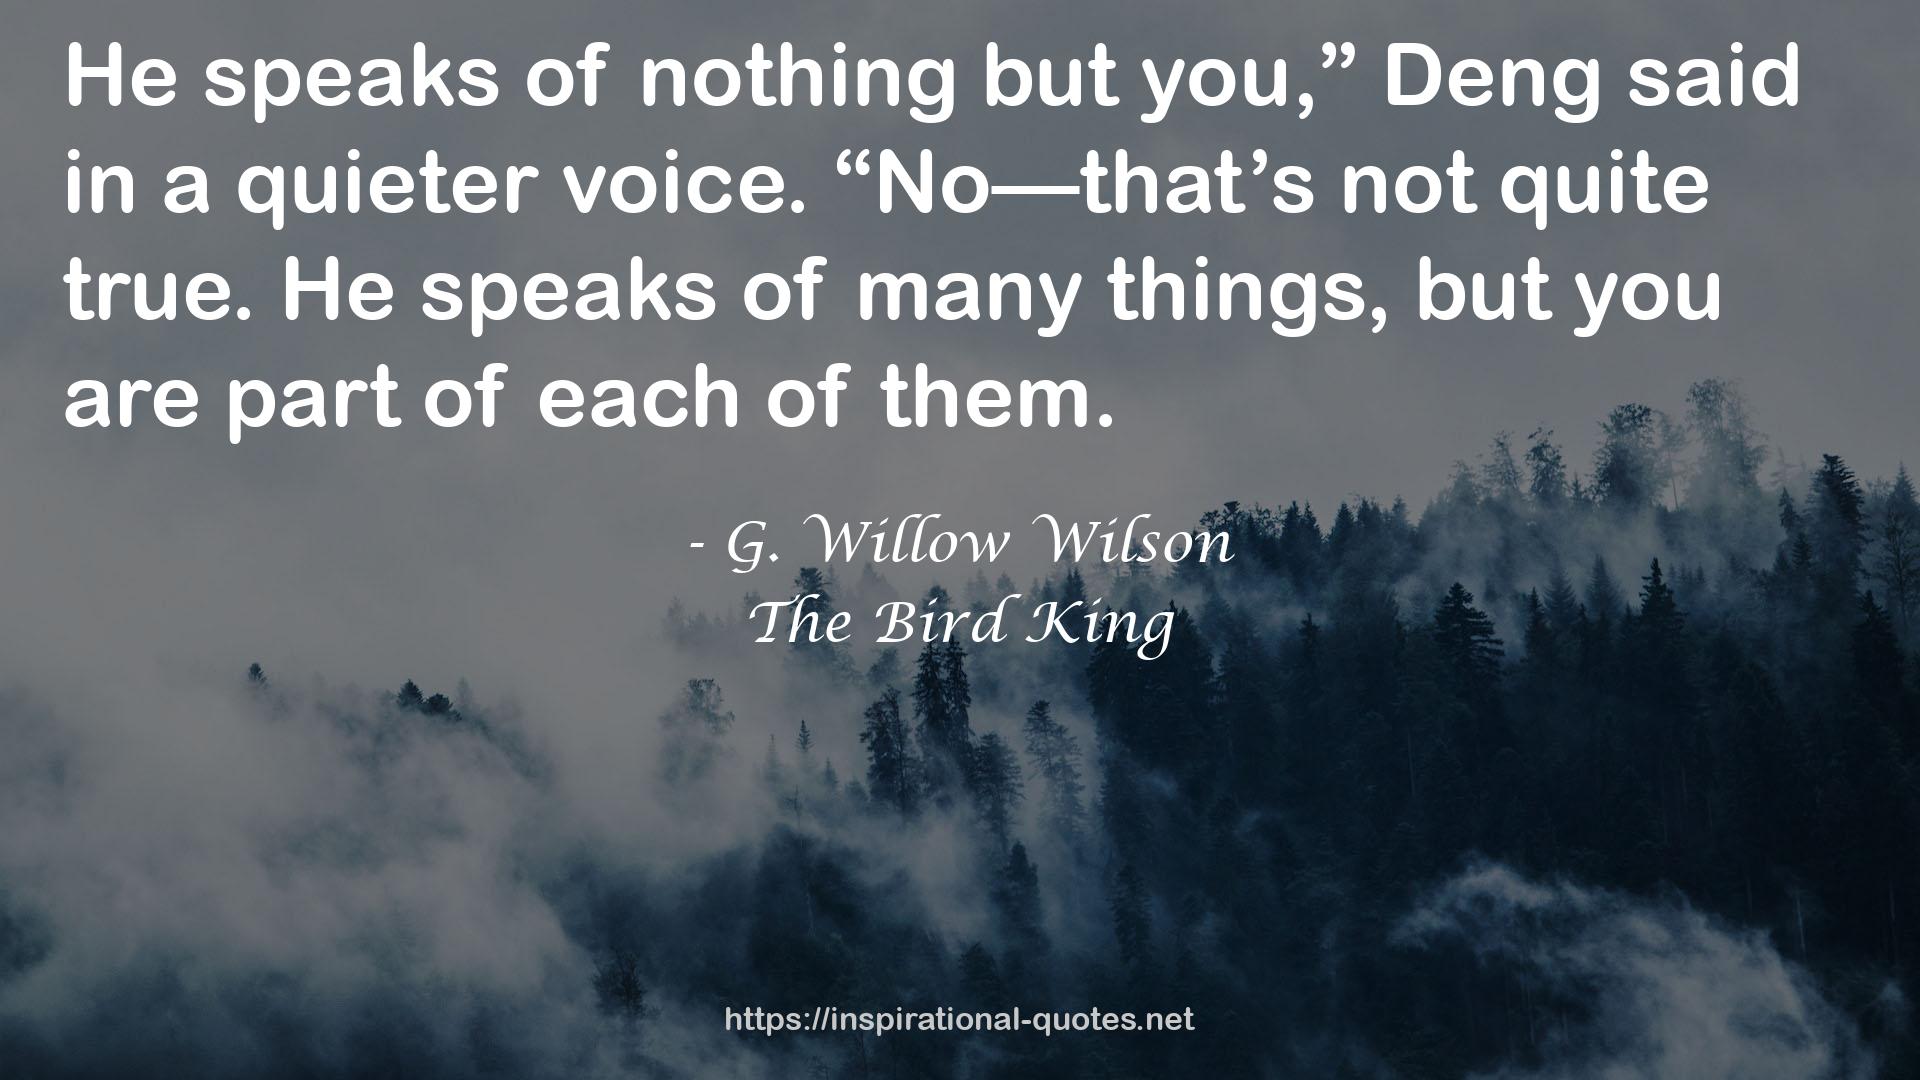 G. Willow Wilson QUOTES